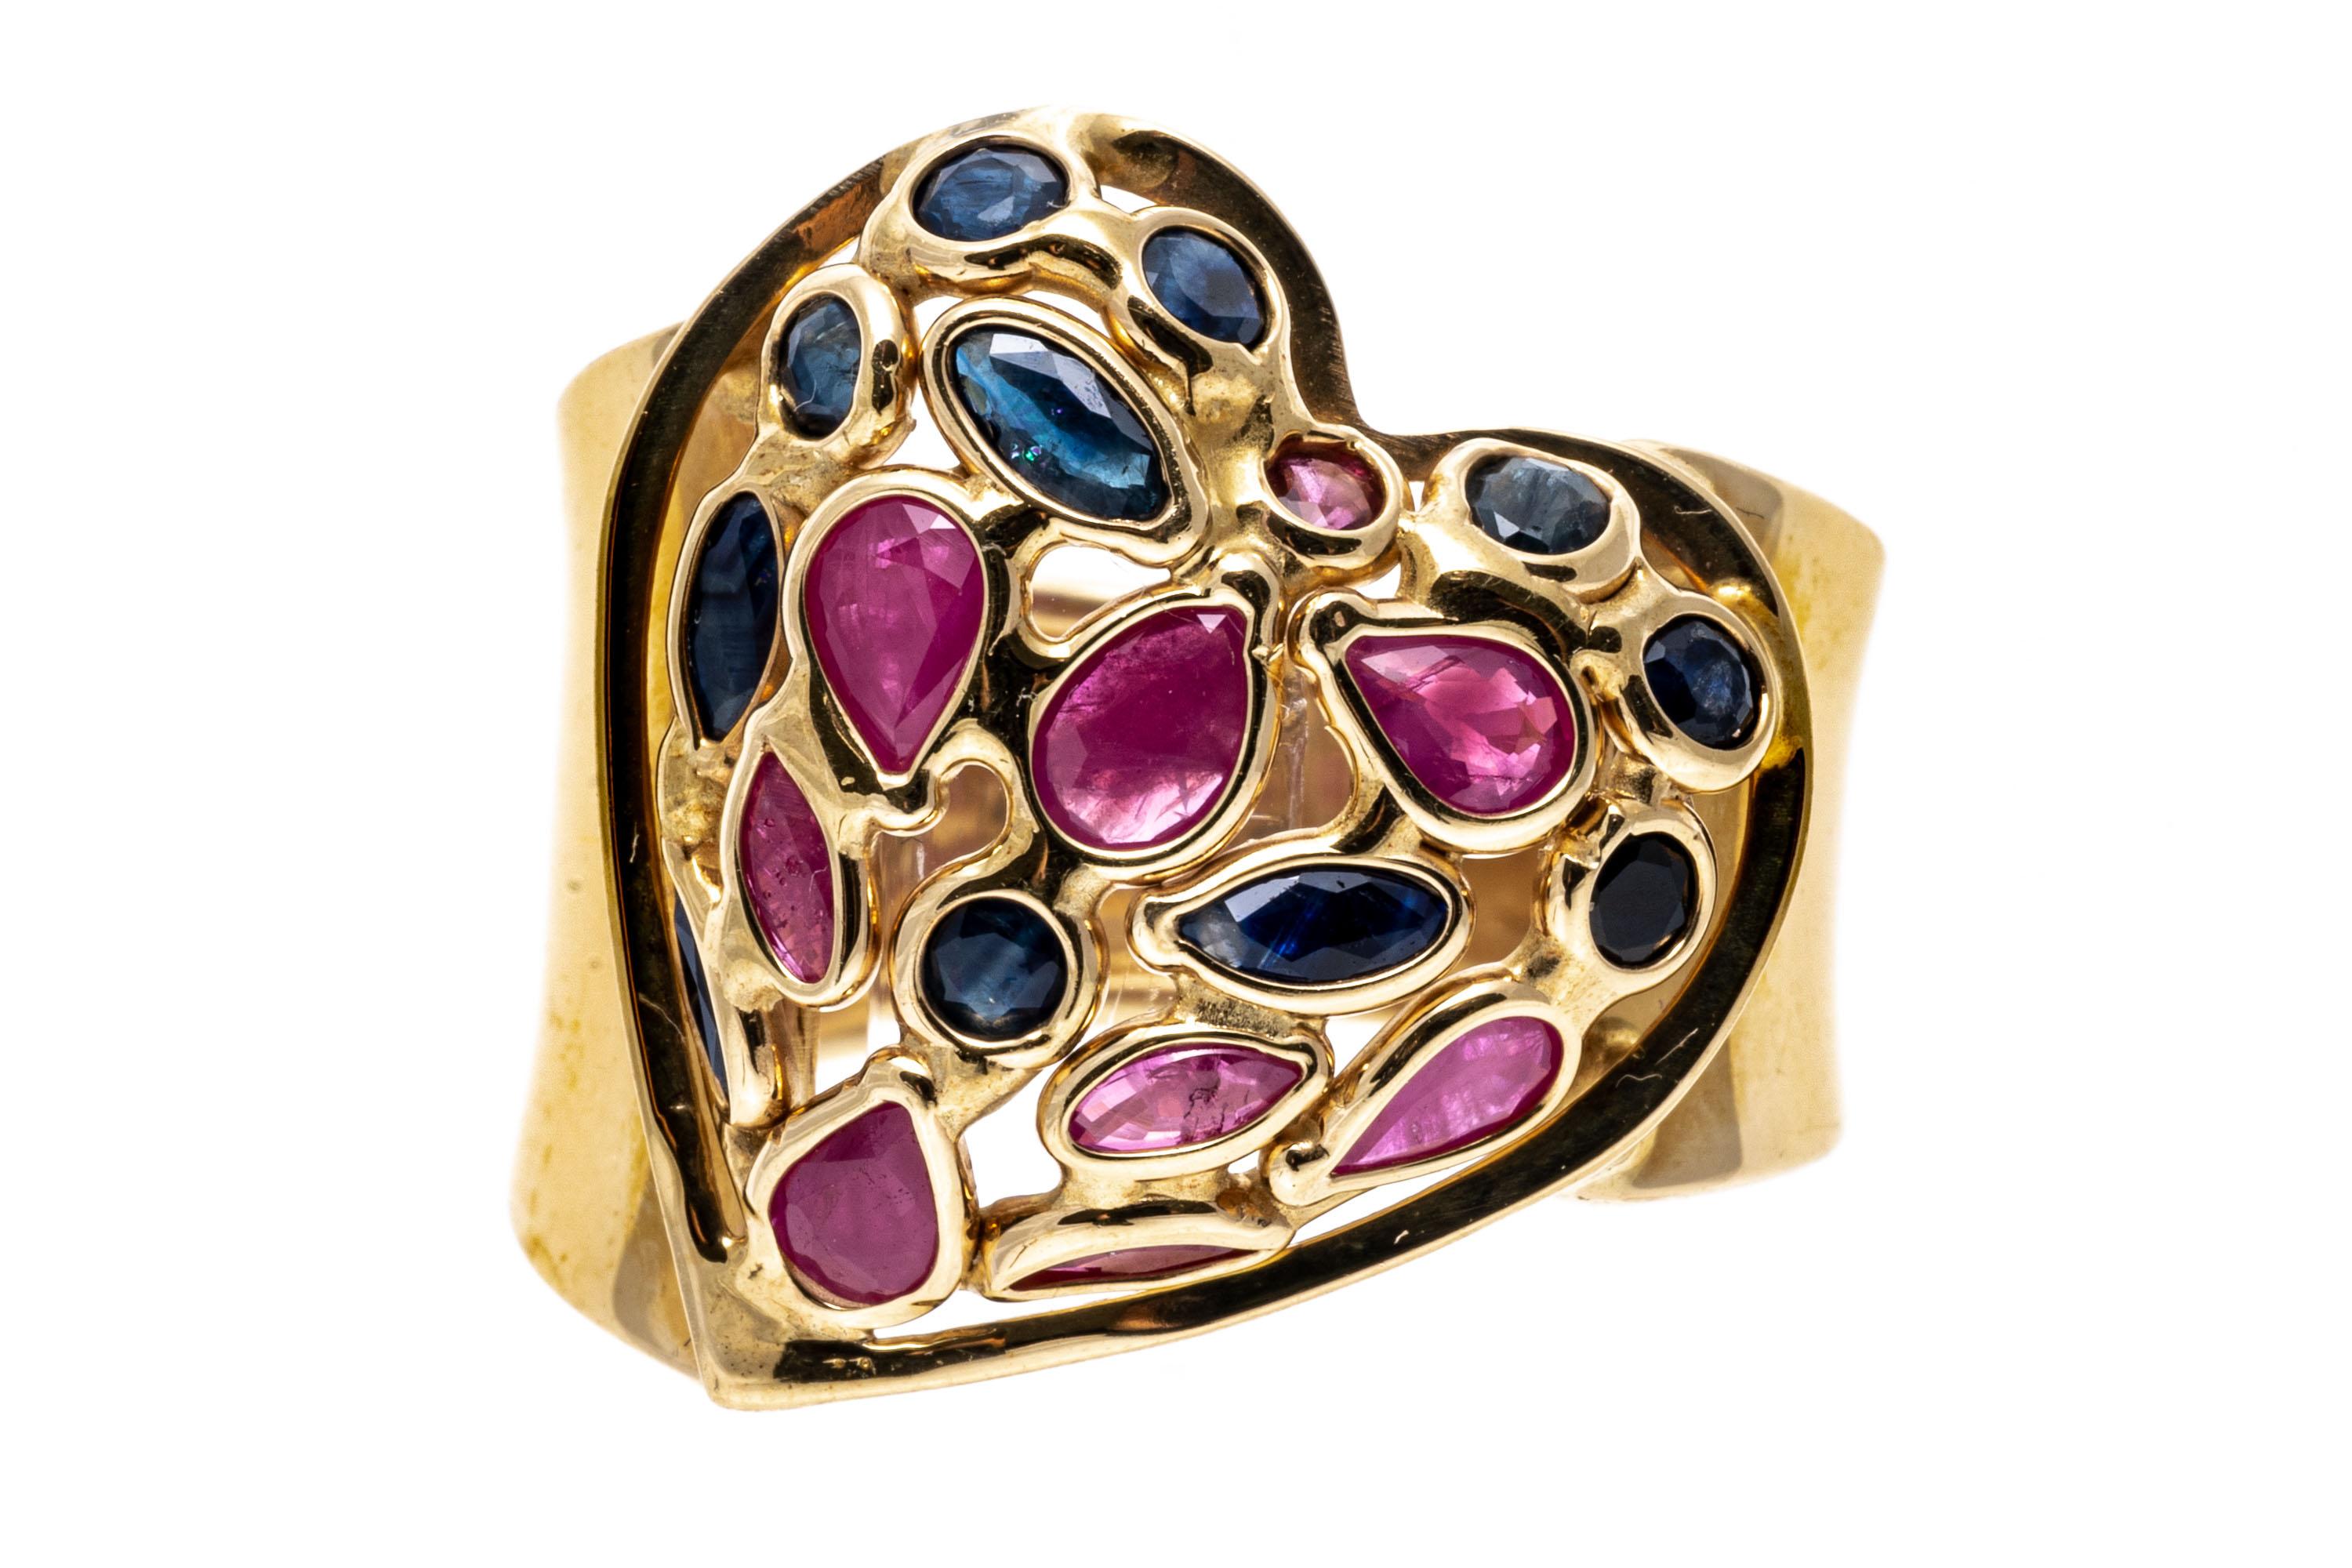 Contemporary 14k Wide Stained Glass Heart Motif Ring Set with Rubies and Sapphires For Sale